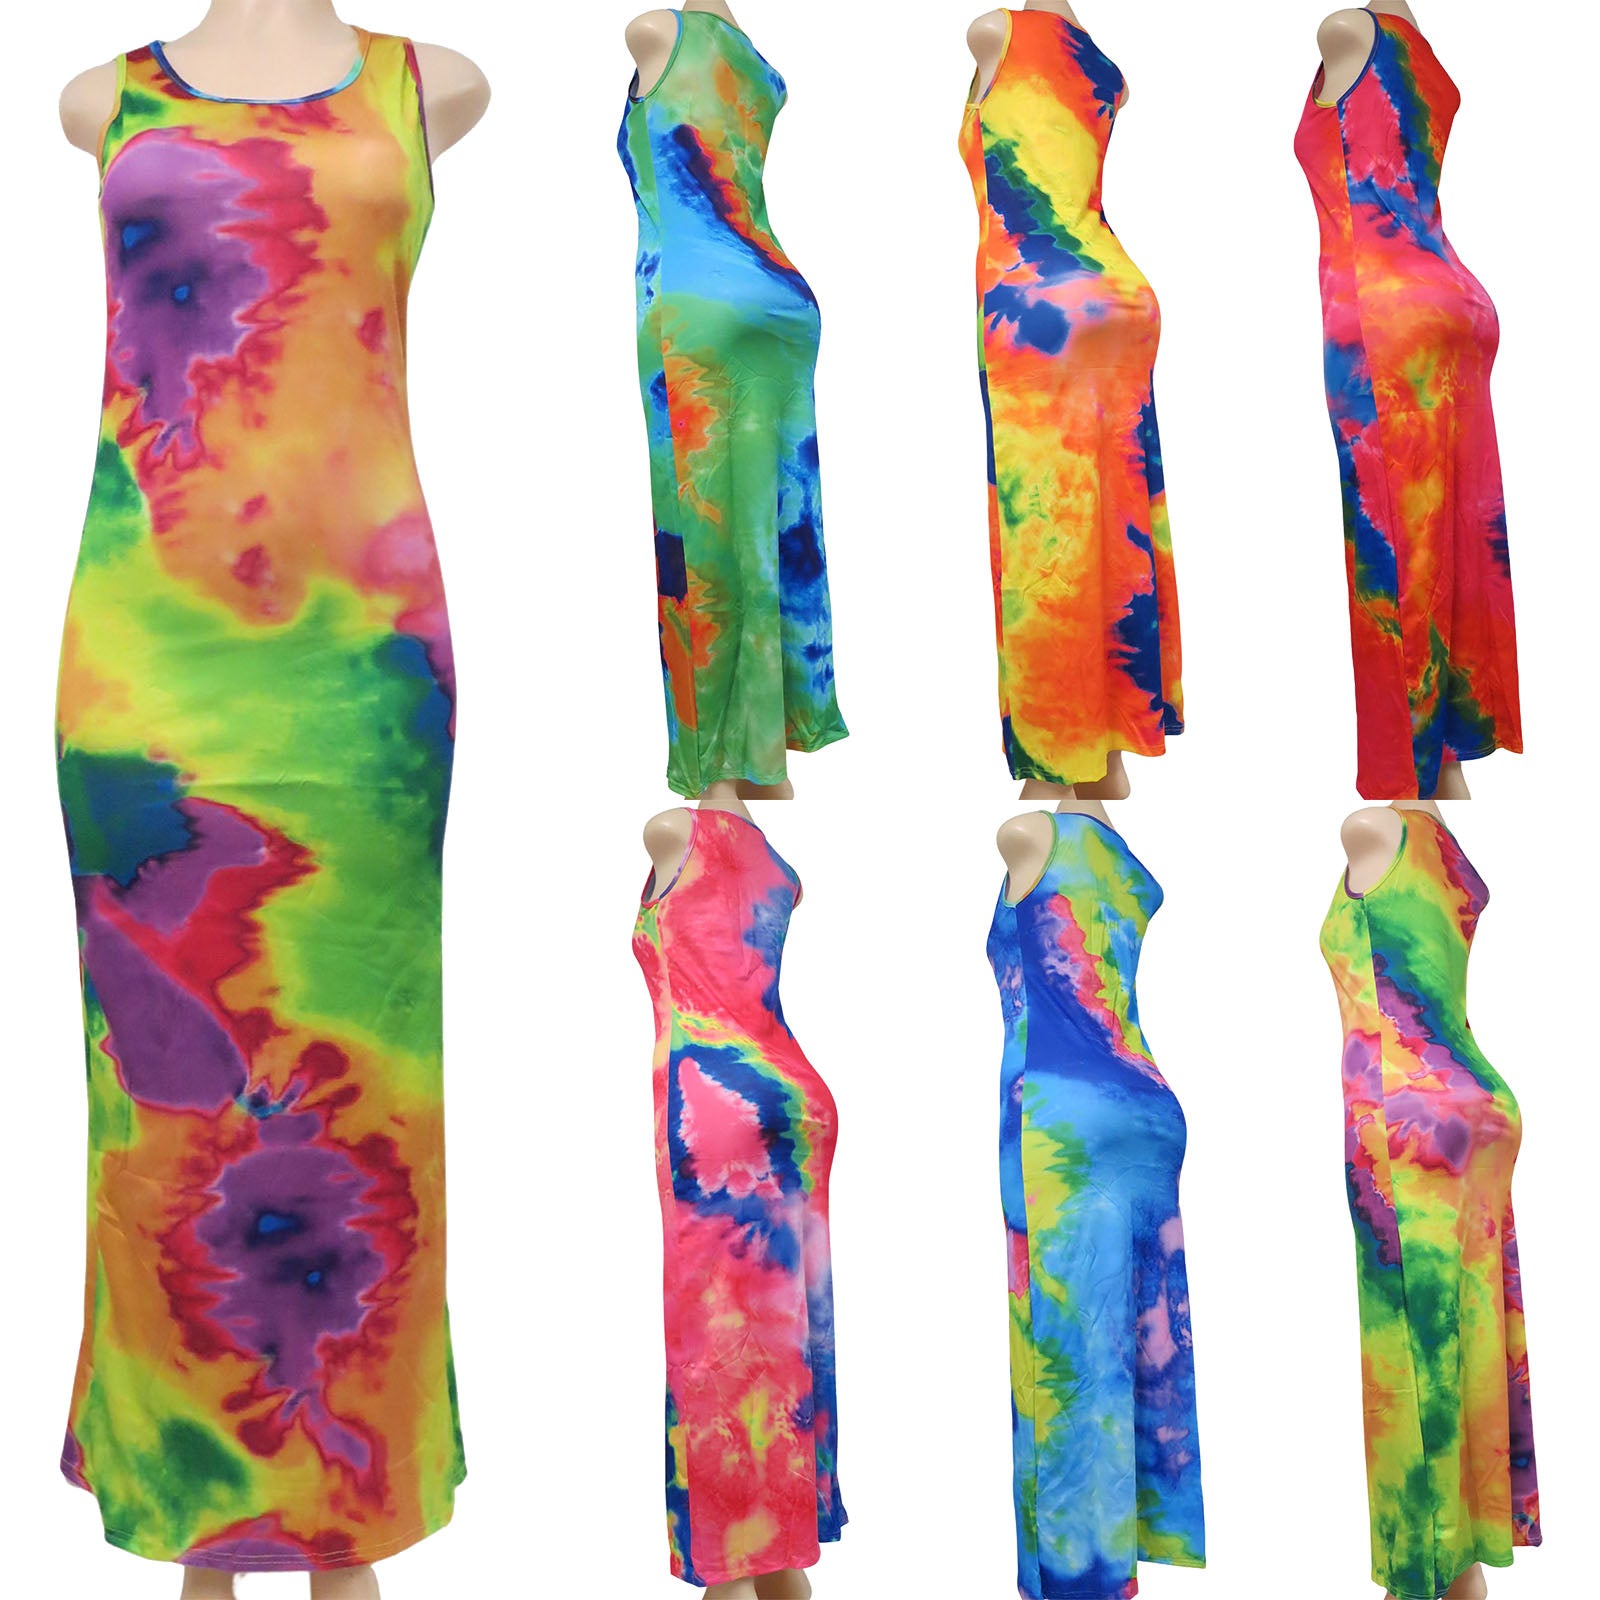 wholesale tie dye long sleeveless dress for women in assorted colors and sizes